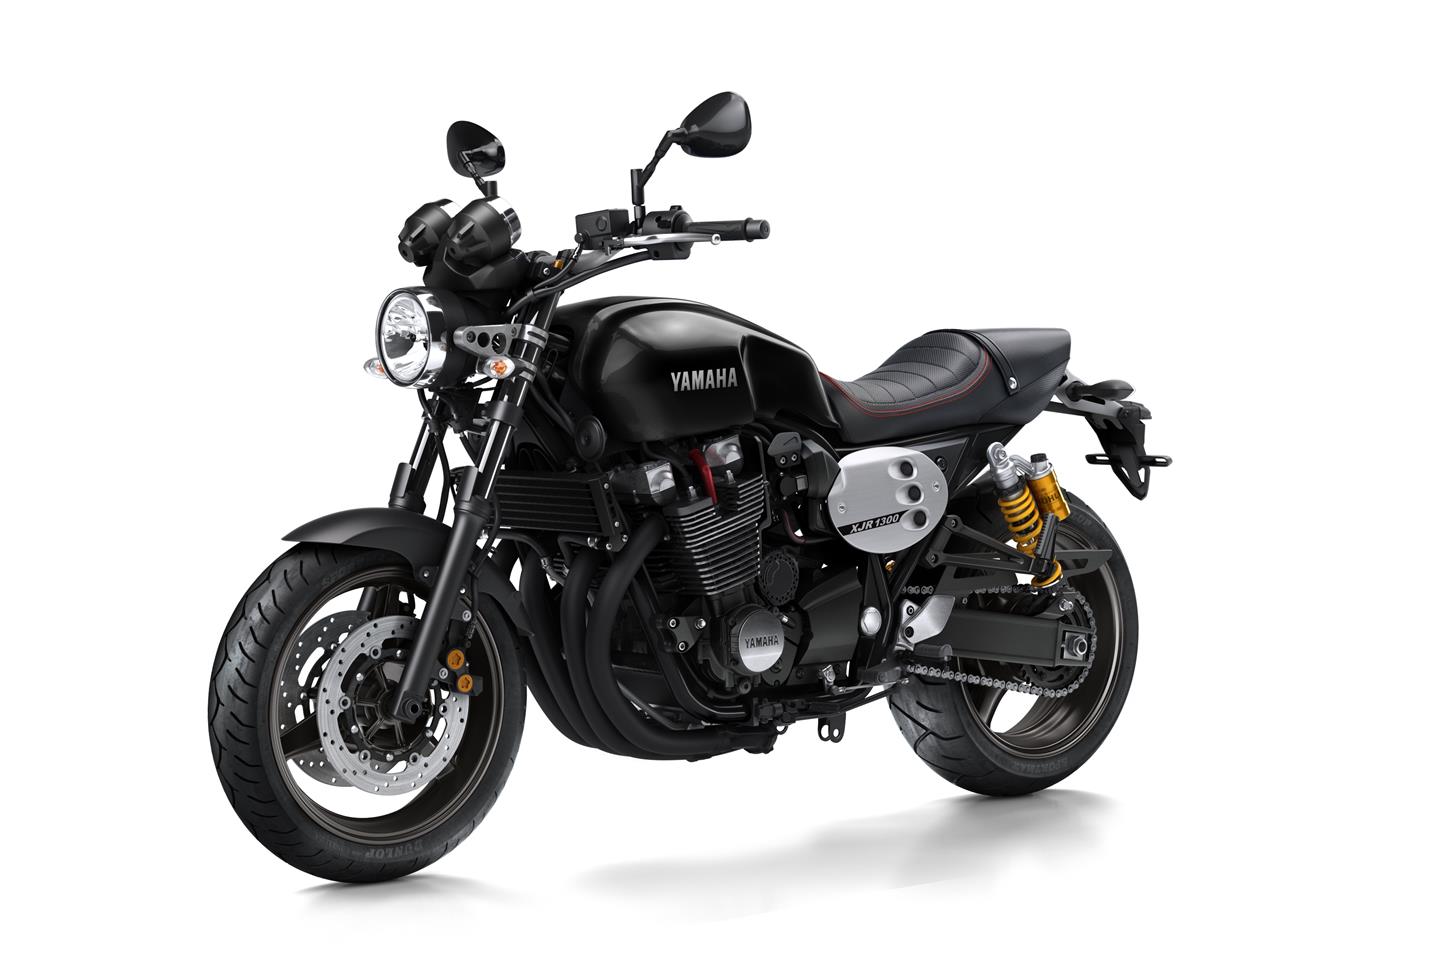 YAMAHA XJR1300 (2015-on) Review | Speed, Specs & Prices